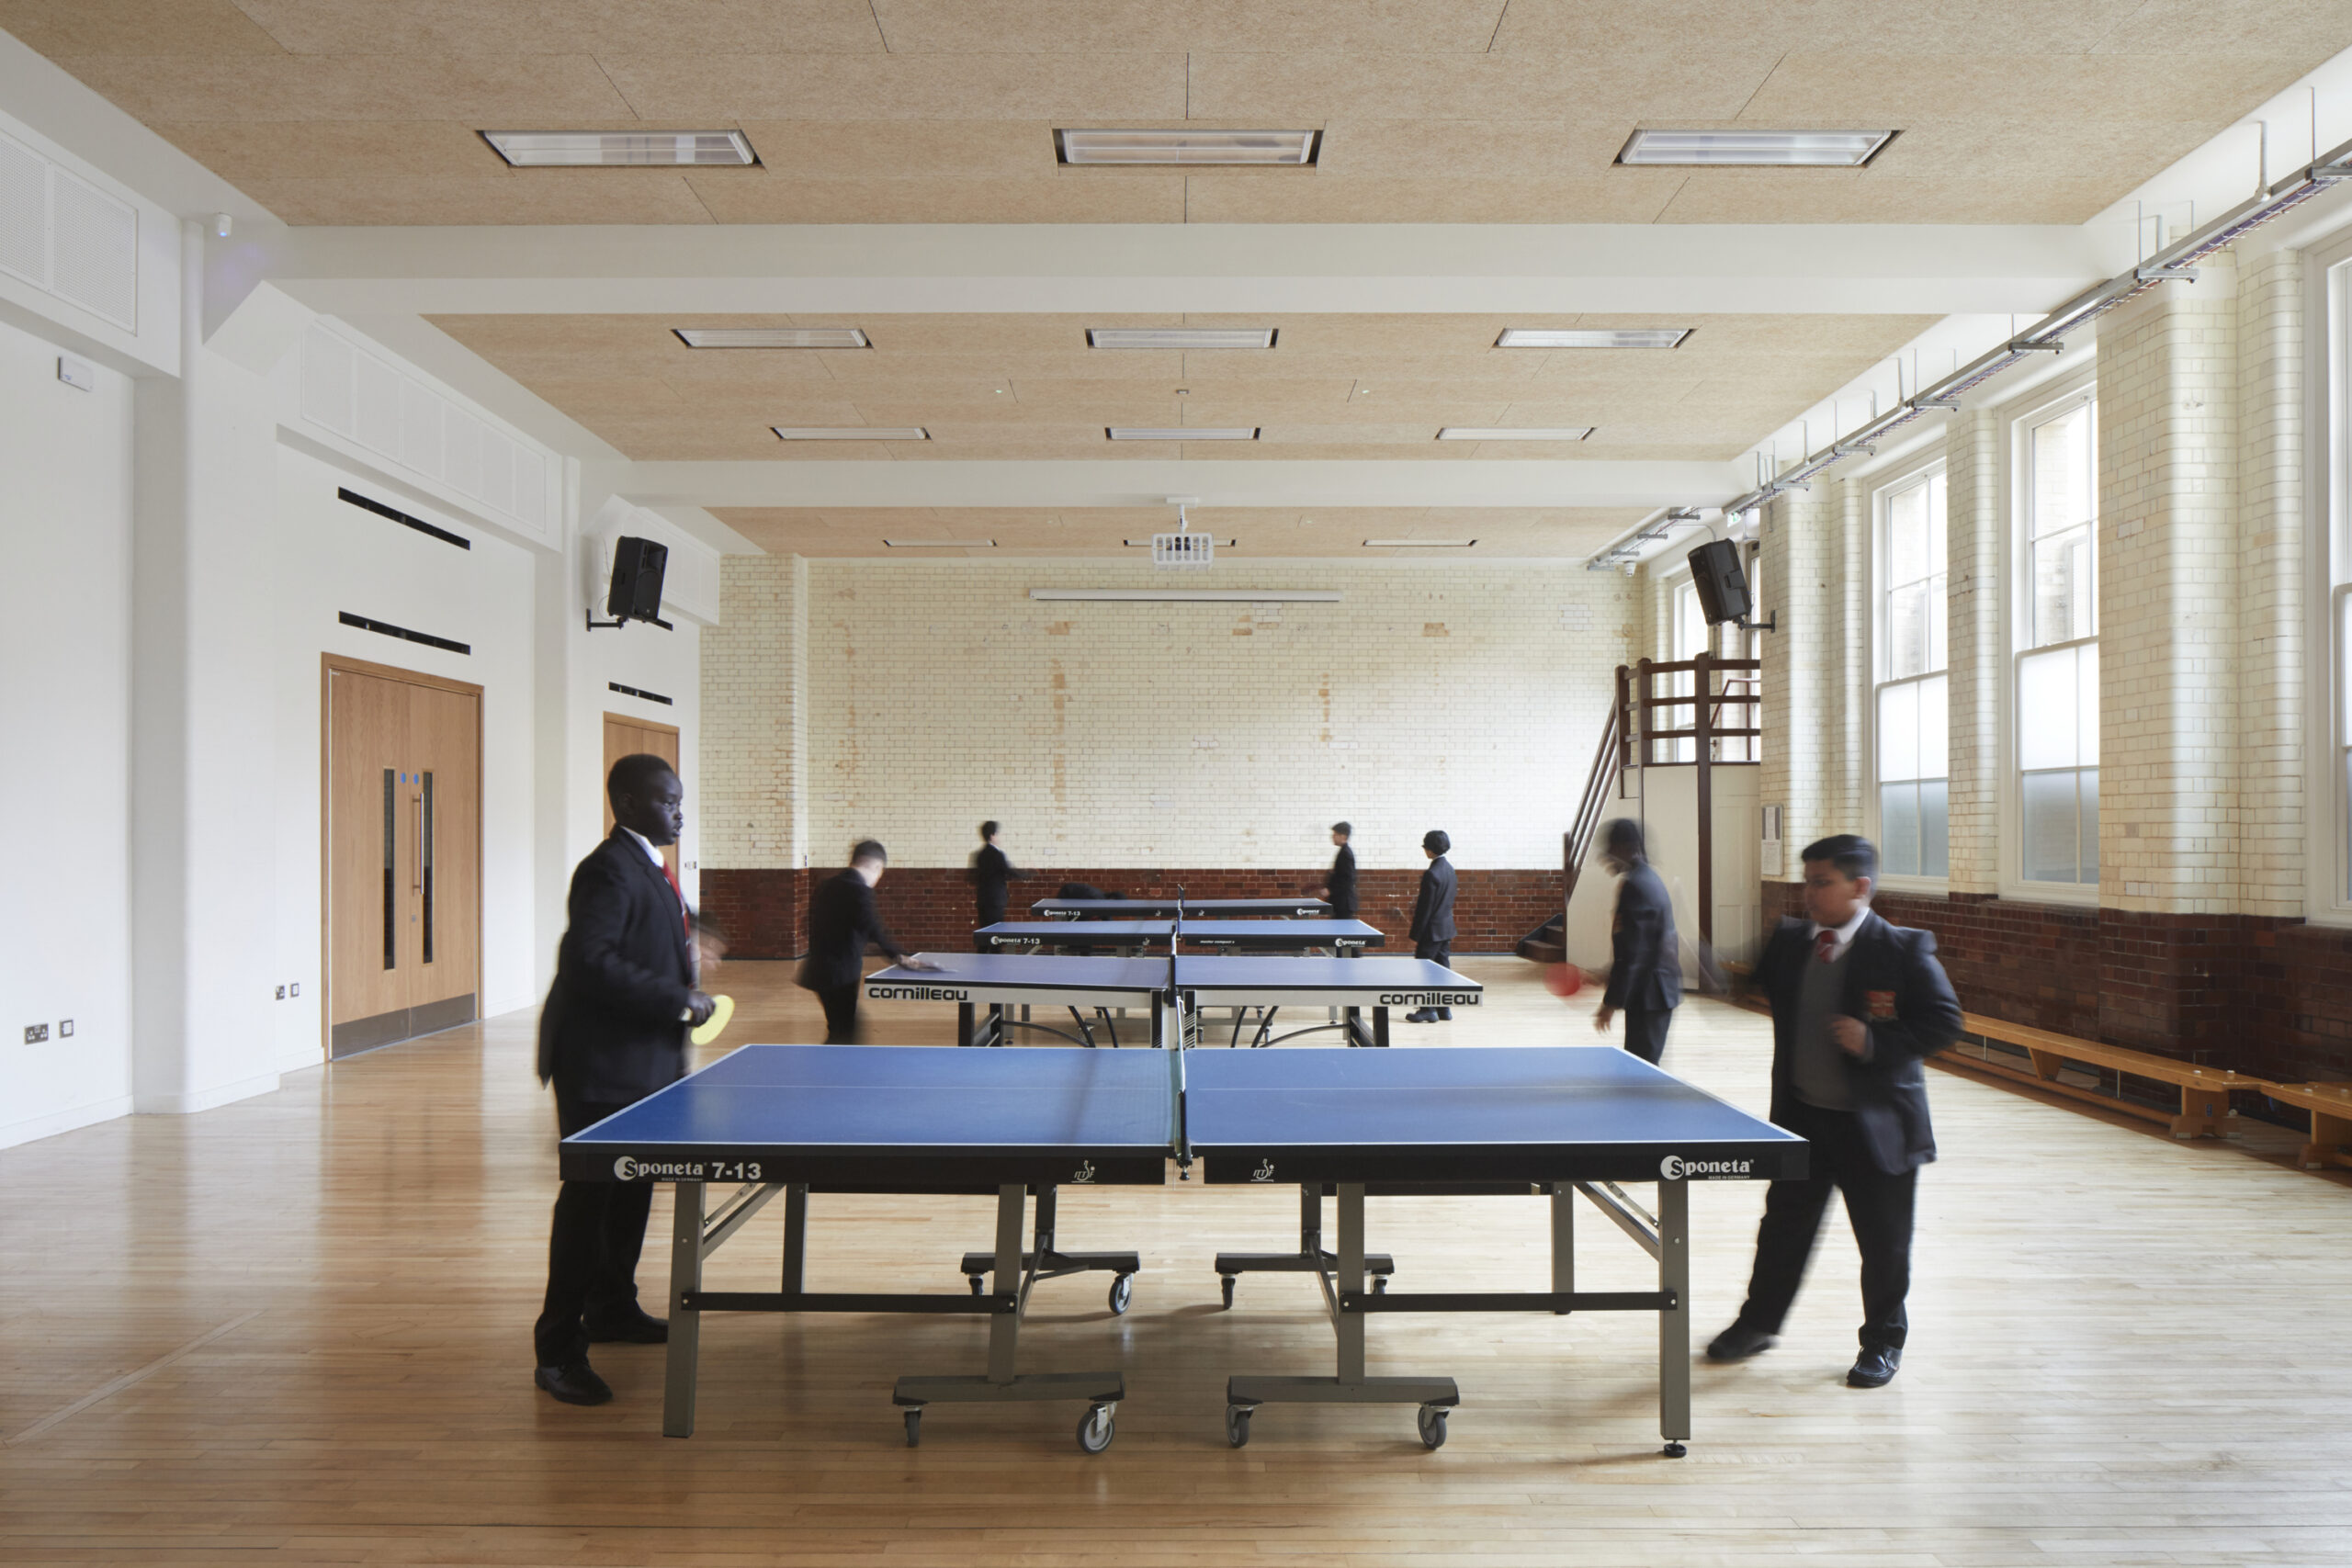 Students playing ping pong at Central Foundation Boys School